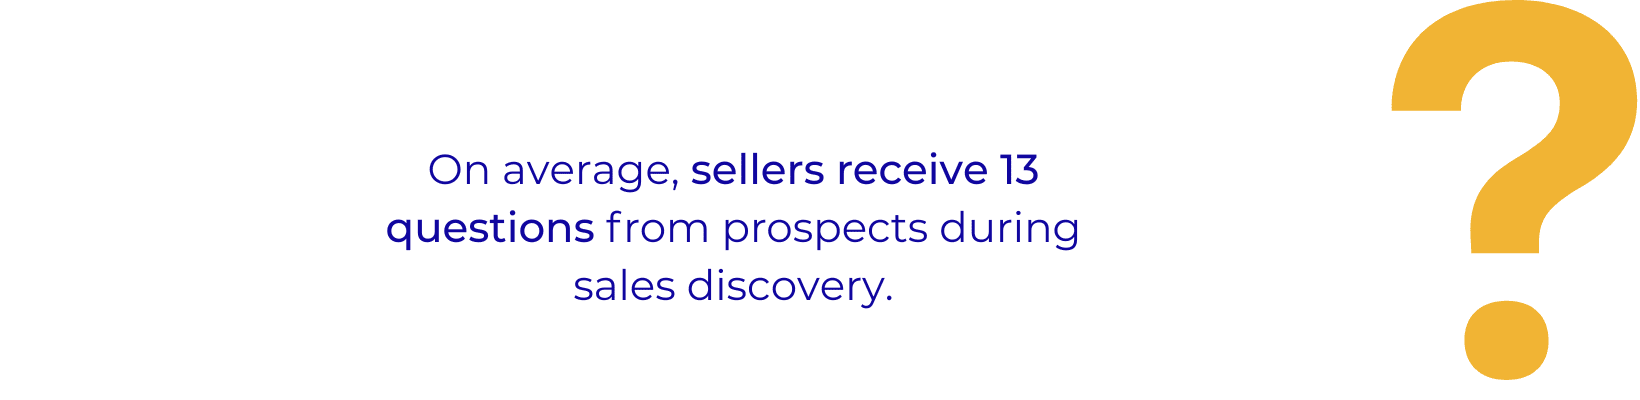 On average, sellers receive 13 questions from prospects during sales discovery.